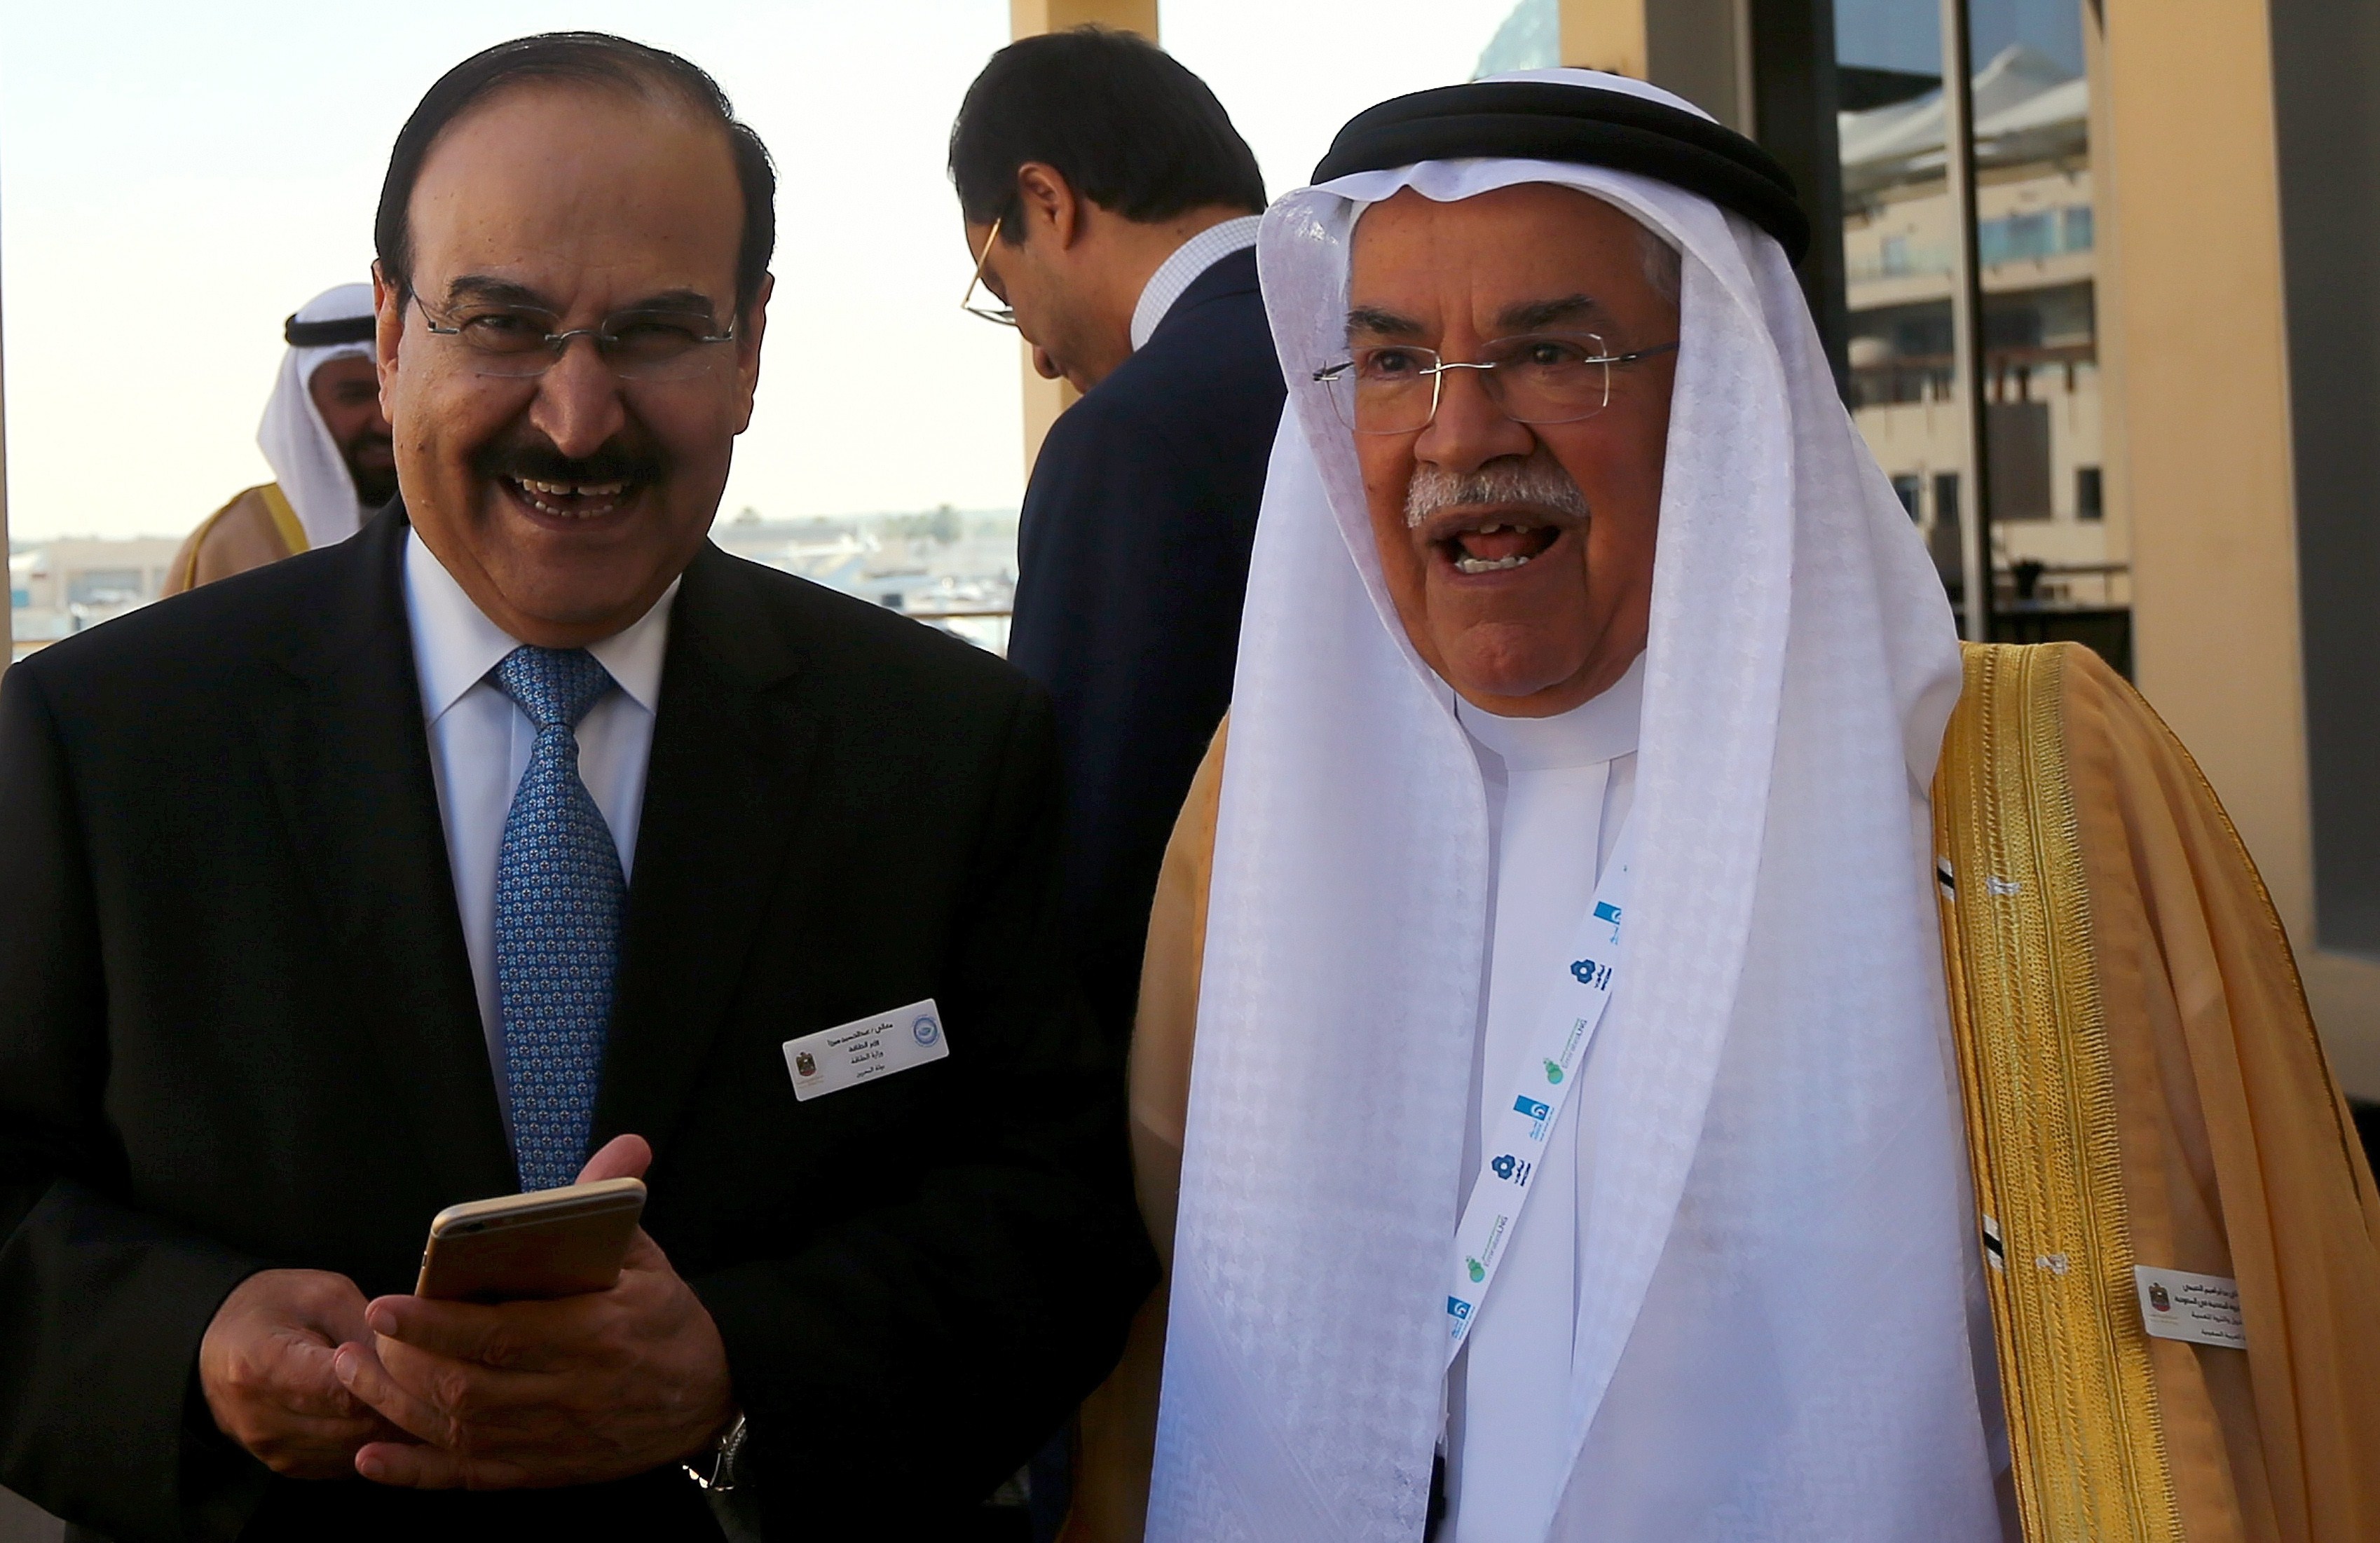 From left: Bahraini Oil Minister Abdulhussain bin Ali Mirza stands with Saudi Oil Minister Ali al-Naimi during the 10th Arab Energy Conference in Abu Dhabi, on Dec. 21, 2014.